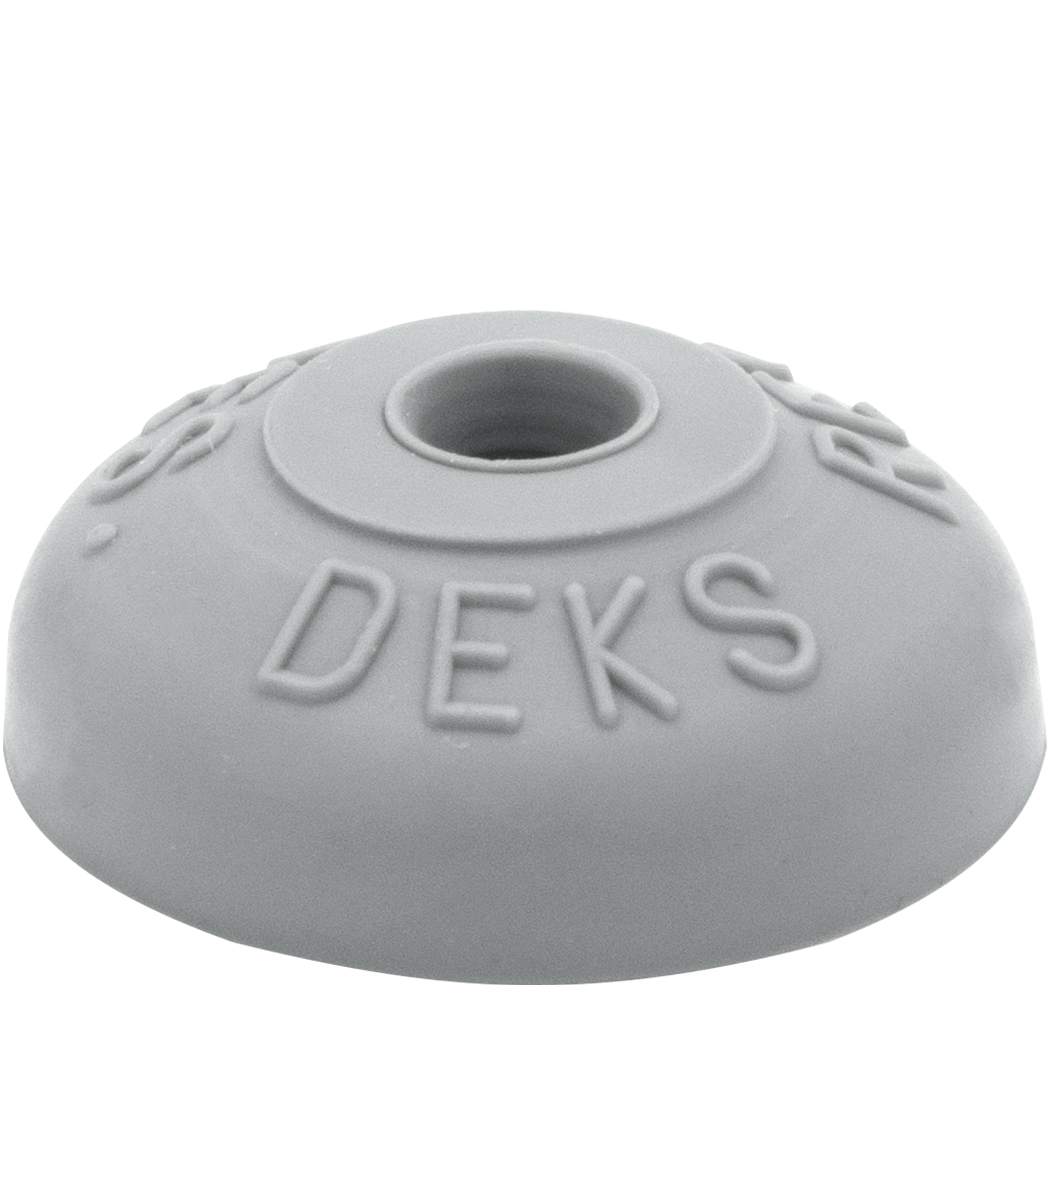 Wesbite Name: Grey Dome Roof Washer